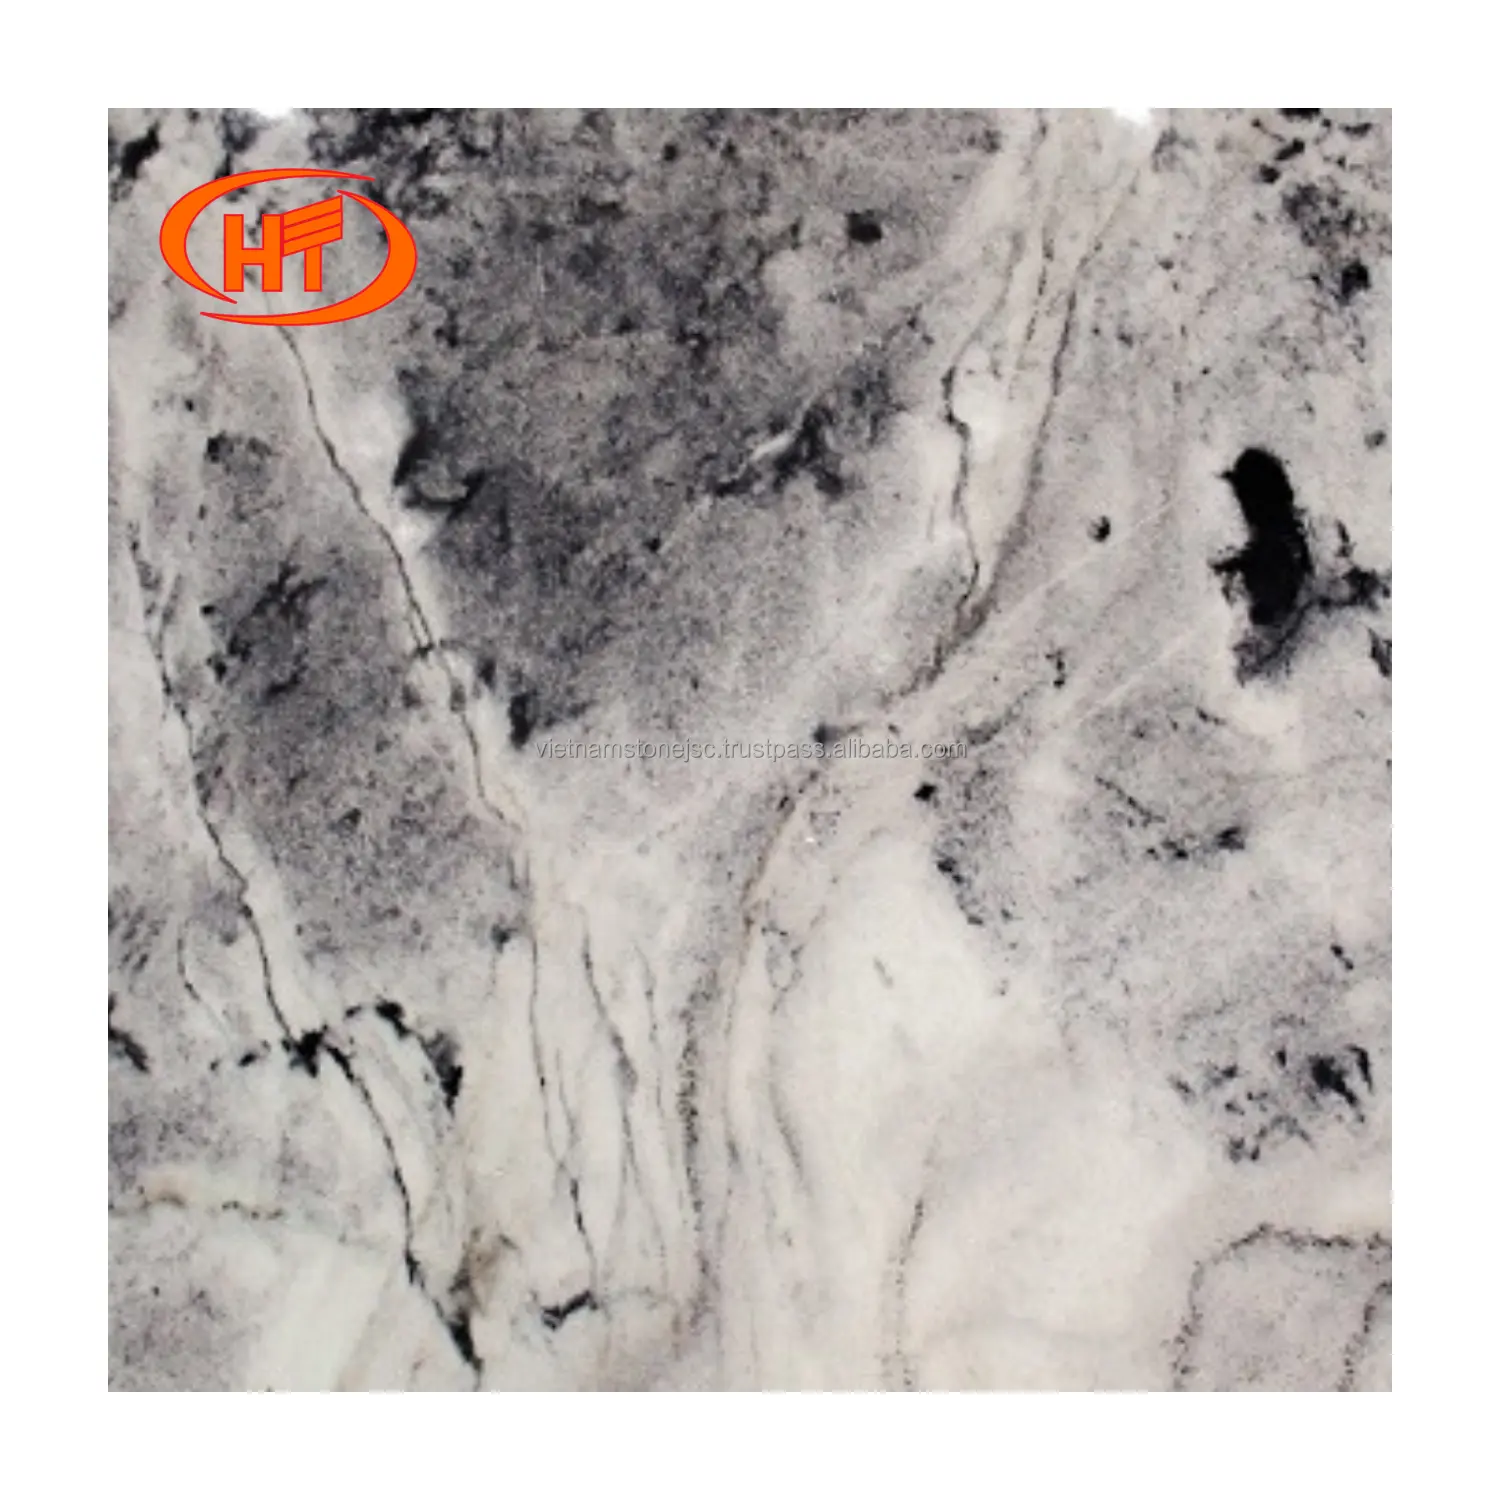 Black Veins Marble Stone competitive price Polished natural white veins glossy black bathroom stone slab in Vietnam